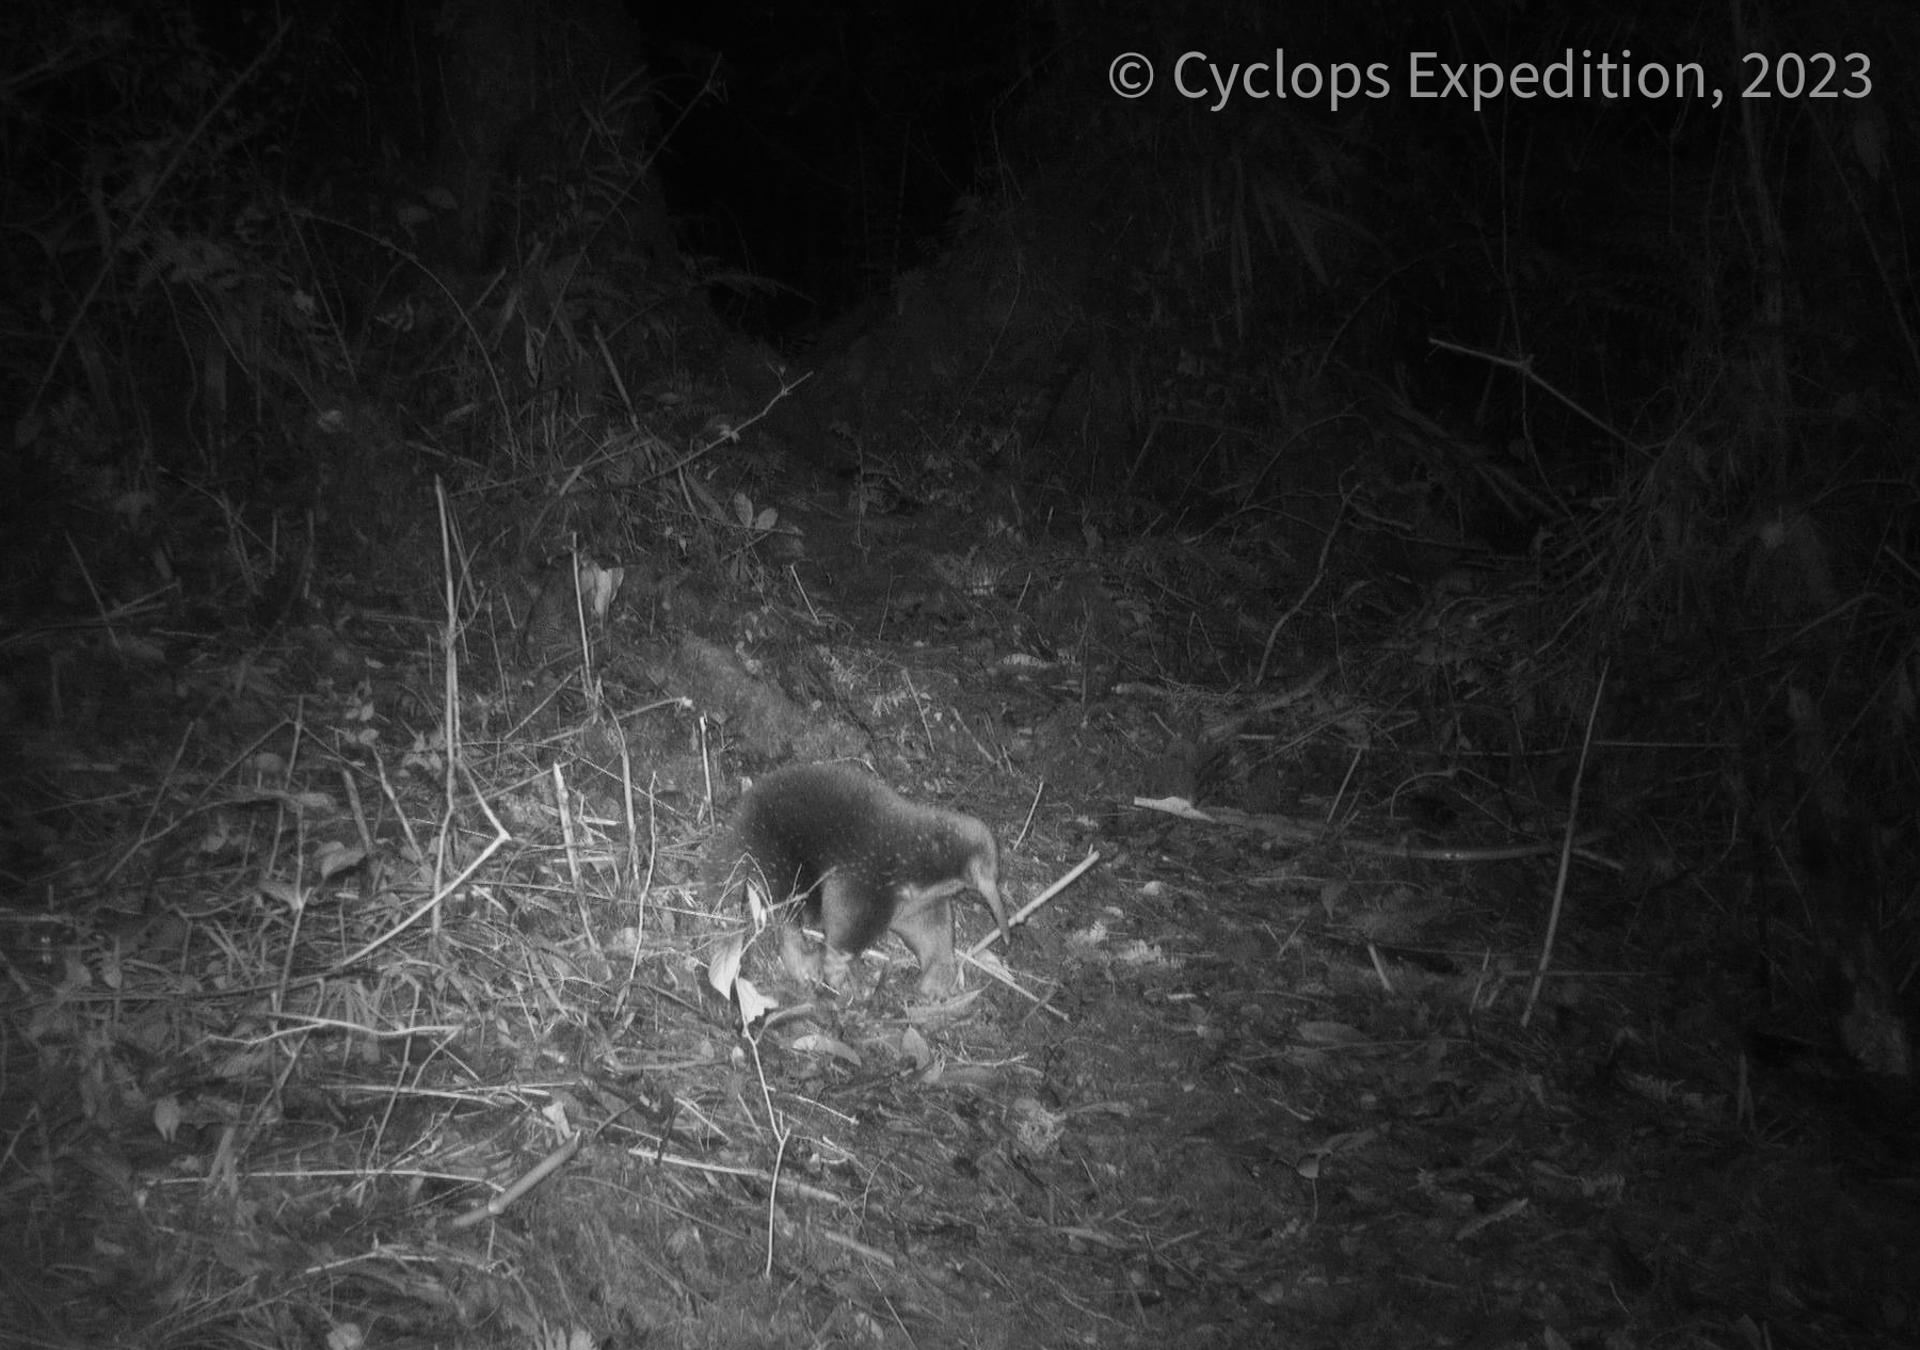 A handout photo from the Cyclops Expedition 2023 shows Attenborough's long-beaked echidna (Zaglossus attenborough) captured on trail cameras in the Cyclops Mountain's in Indonesia's Papua province. EFE/HANDOUT/CYCLOPS EXPEDITION 2023